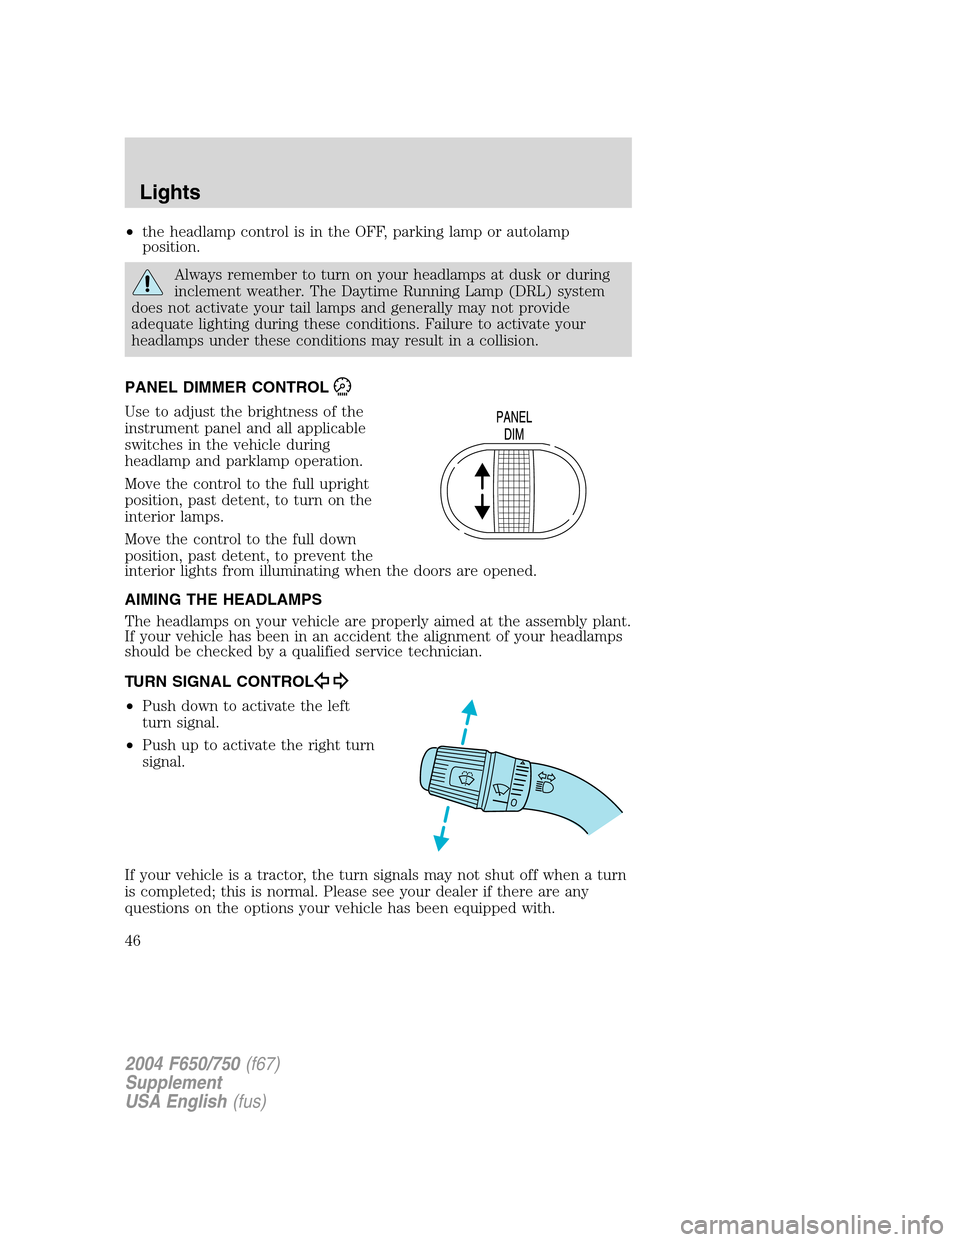 FORD F650 2004 11.G Service Manual •the headlamp control is in the OFF, parking lamp or autolamp
position.
Always remember to turn on your headlamps at dusk or during
inclement weather. The Daytime Running Lamp (DRL) system
does not 